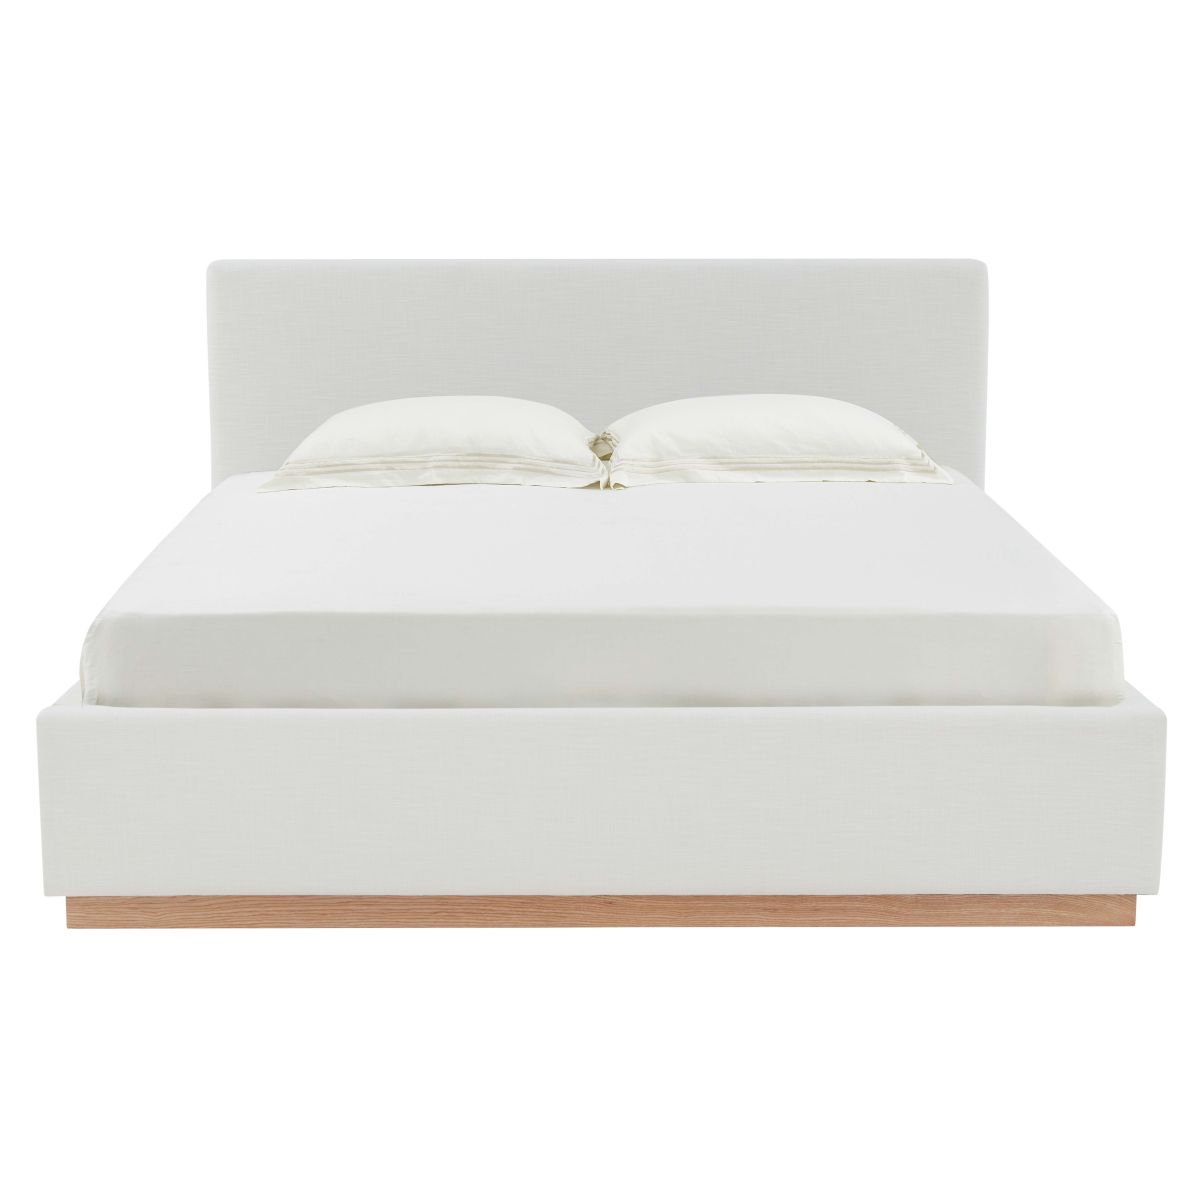 Safavieh Couture Pippin Linen Bed